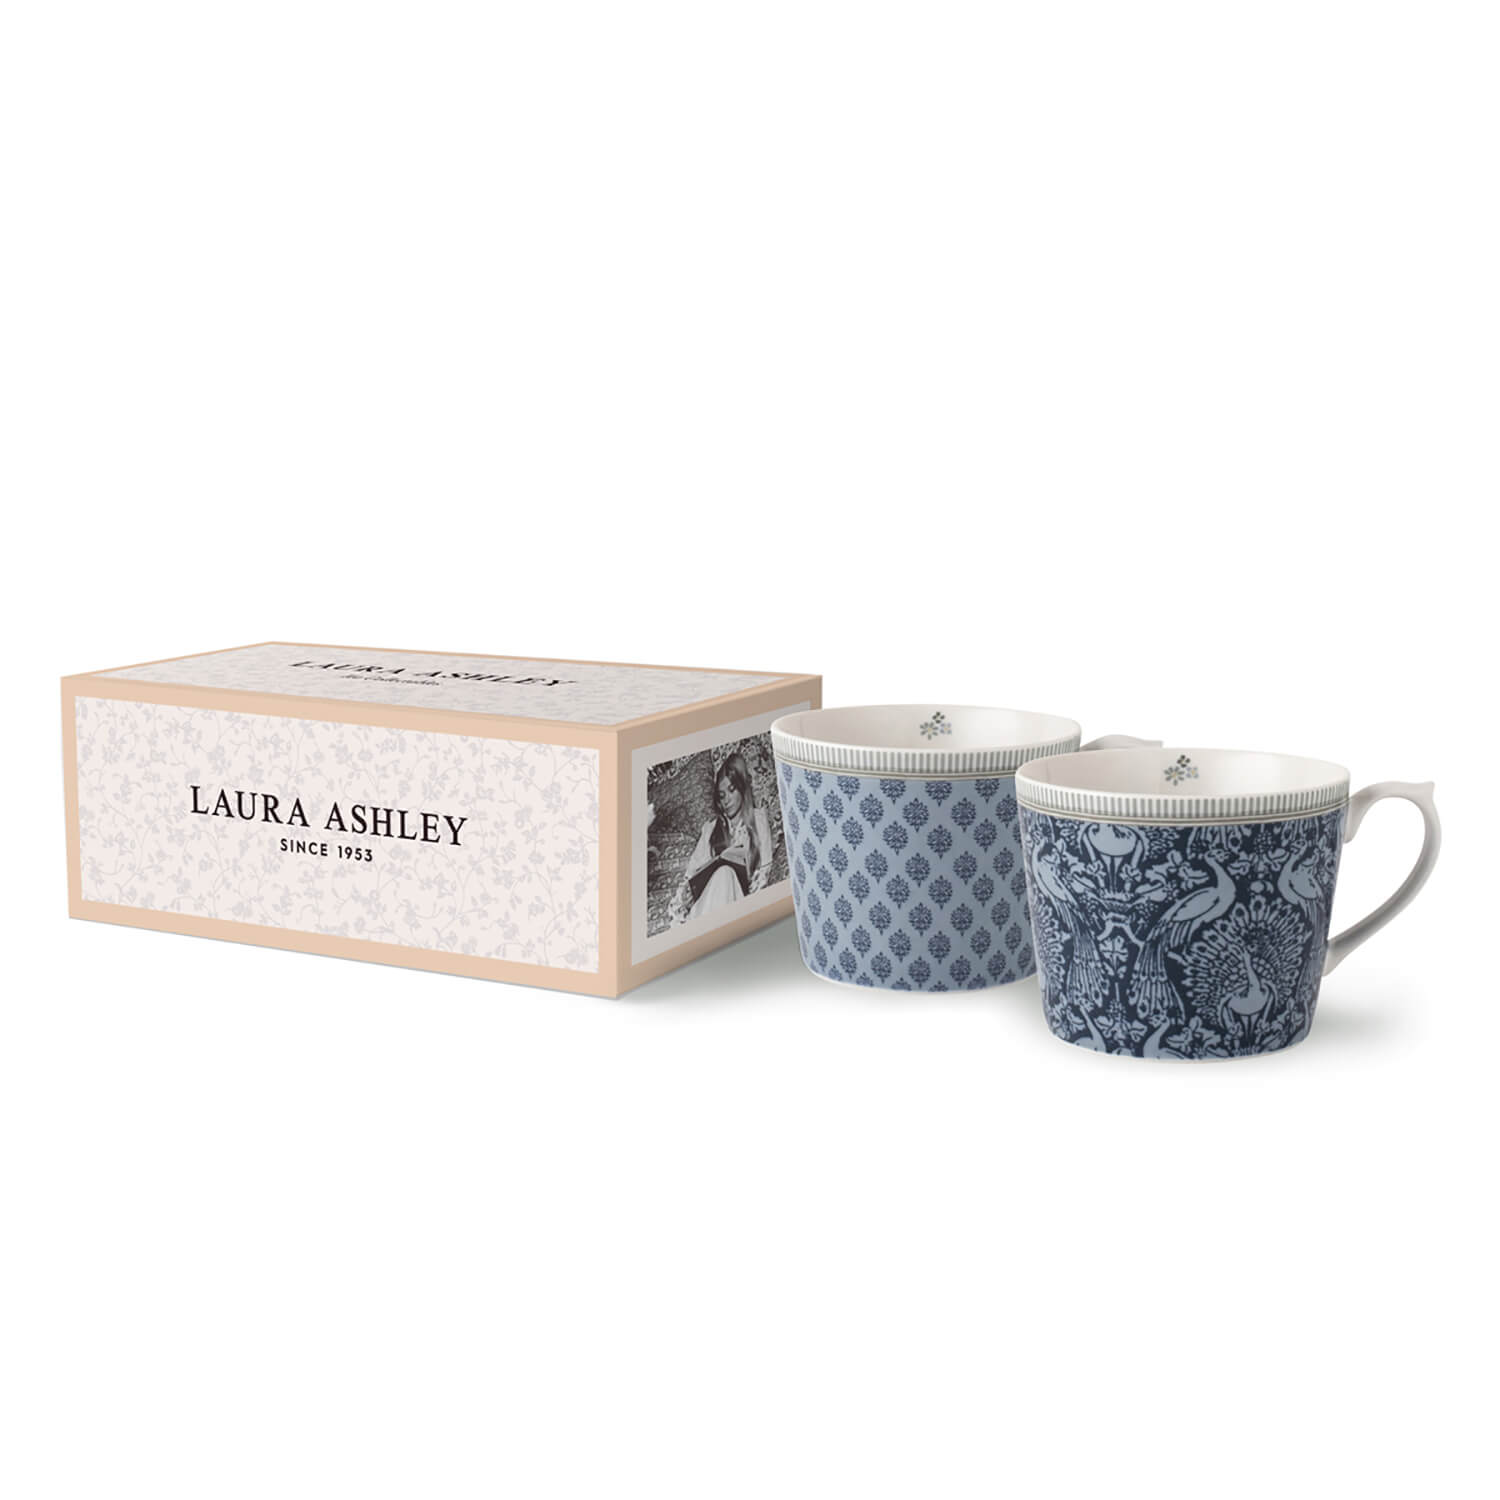 Laura Ashley Tea Collectables Set of 2 Mugs - 30cl 1 Shaws Department Stores